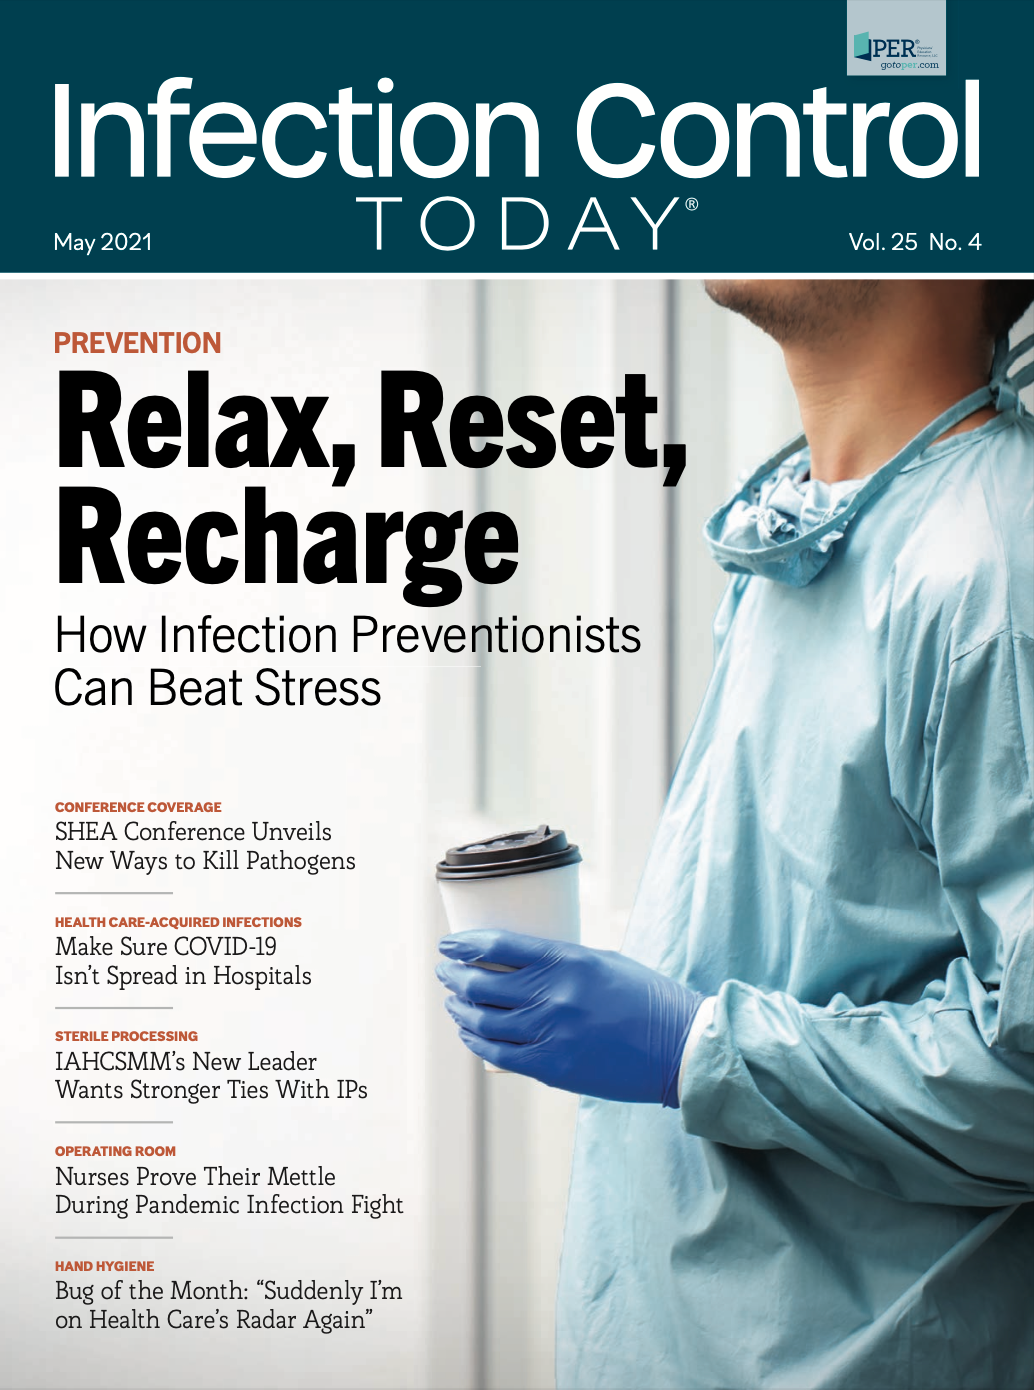 Infection Control Today, May 2021 (Vol. 25 No.4)